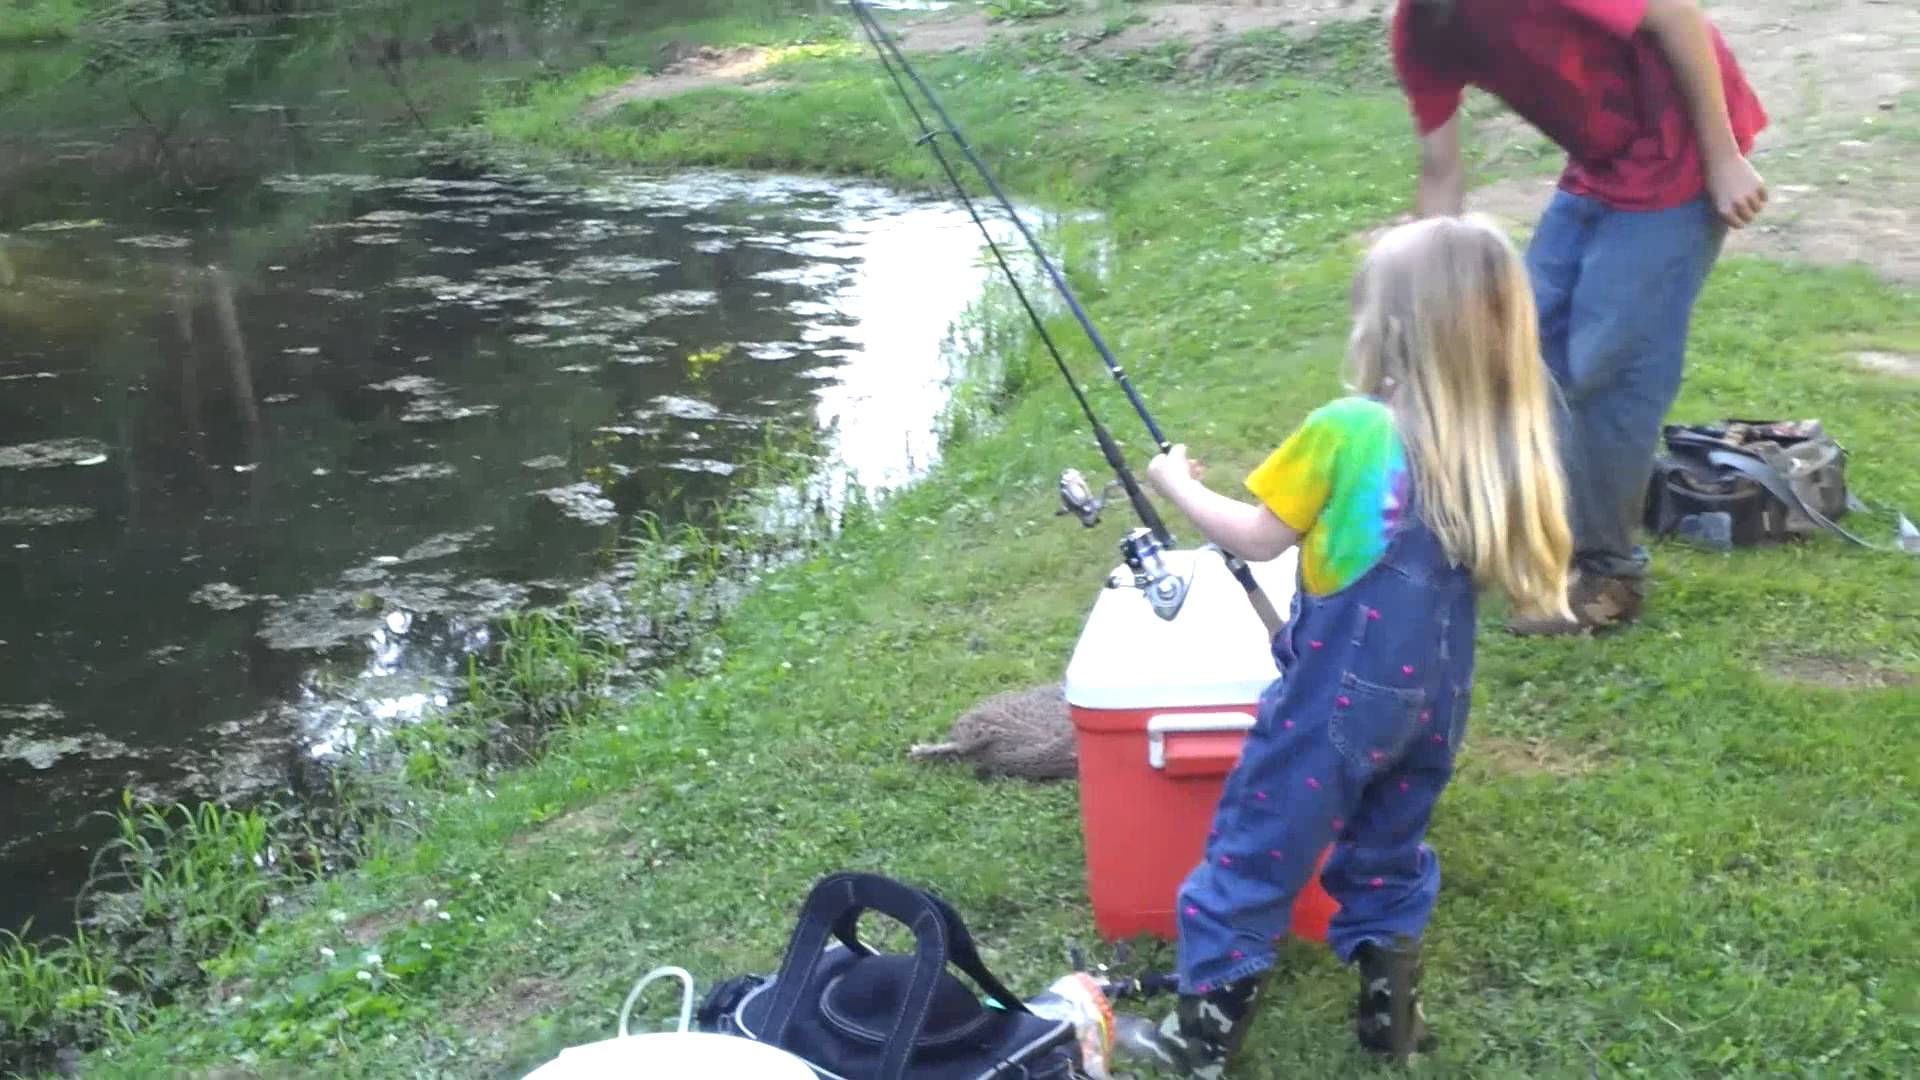 little girl catches big fish - YouTube